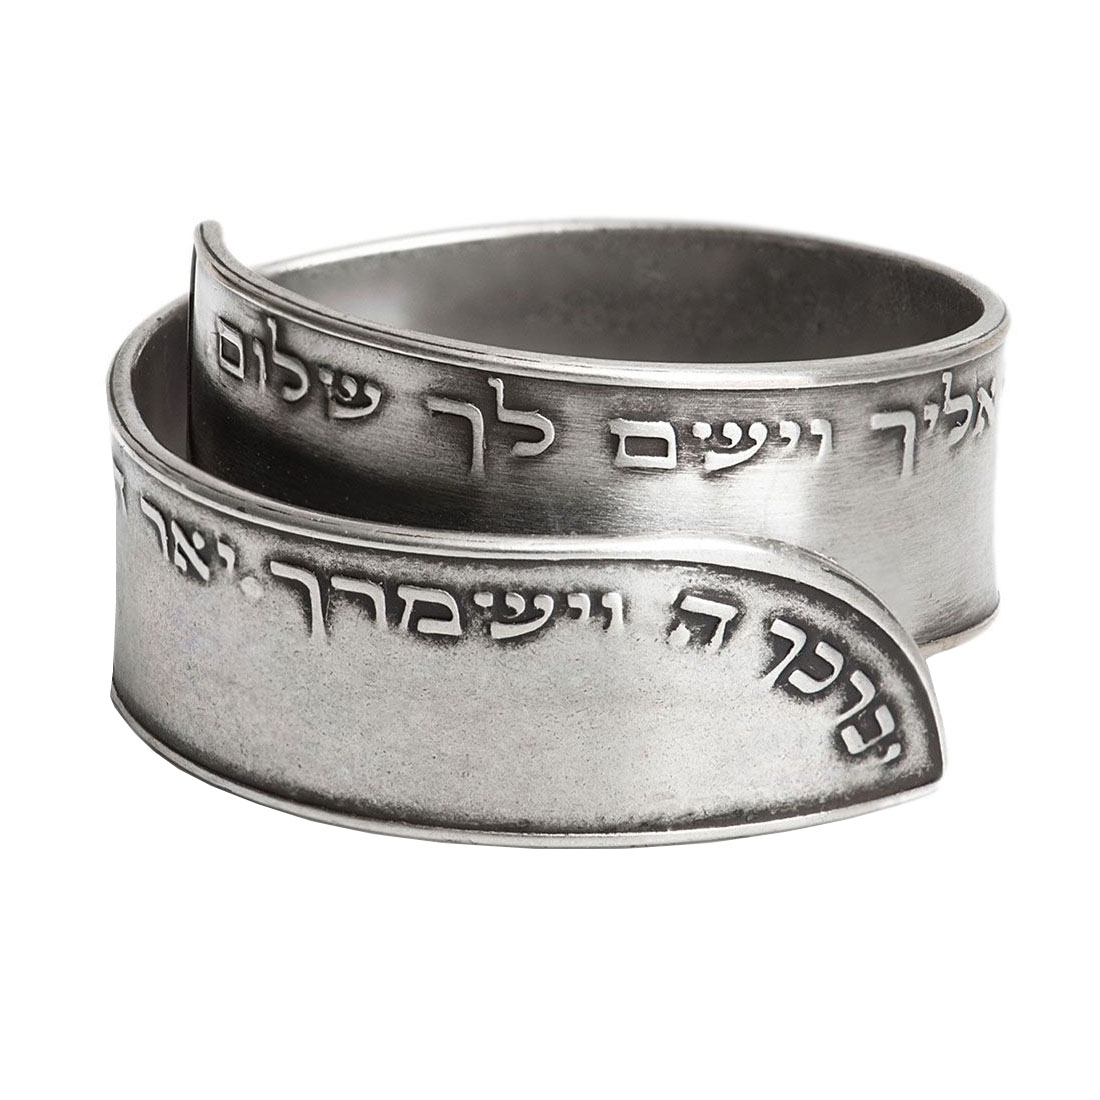 Handmade Blackened 925 Sterling Silver Adjustable Unisex Ring With Priestly Blessing (Numbers 6) - 1